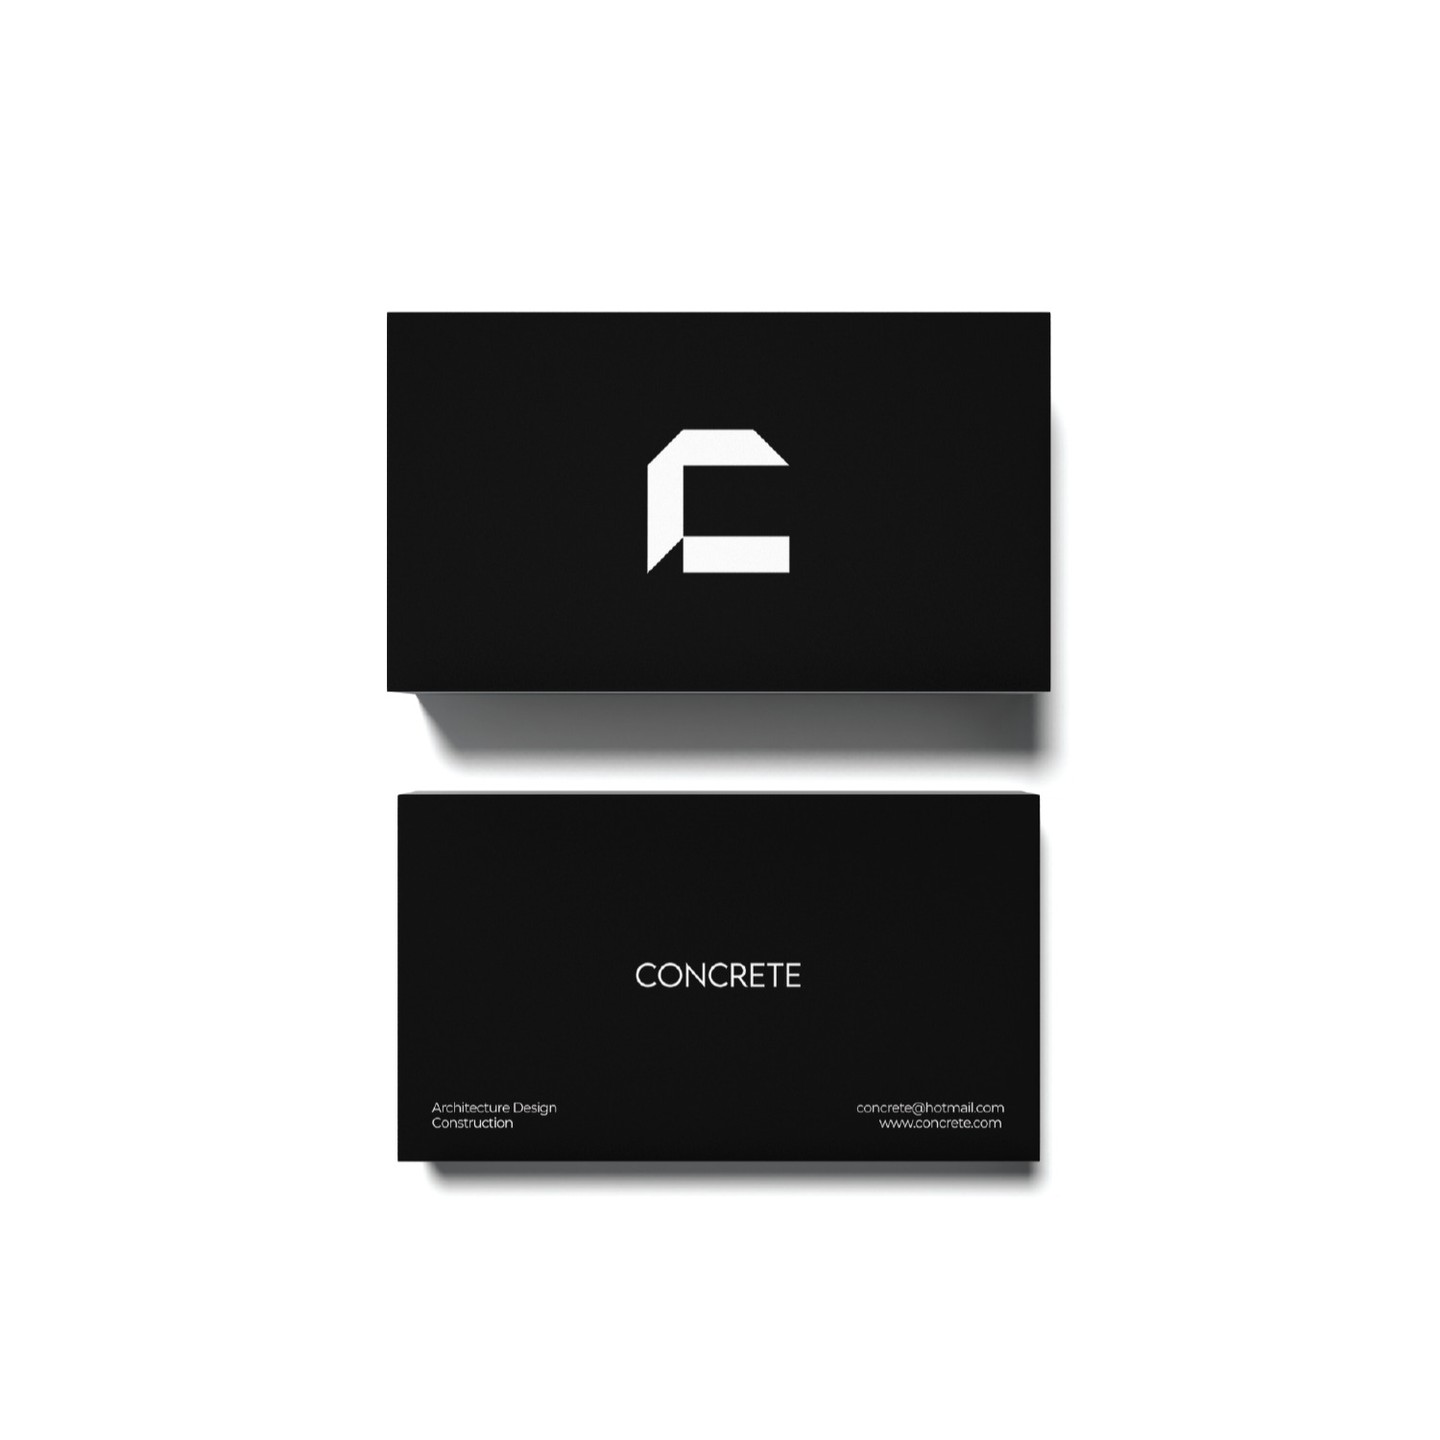 Concrete—Brand Identity 

Concrete is an architecture design construction that builds dreams in one structure at a time!